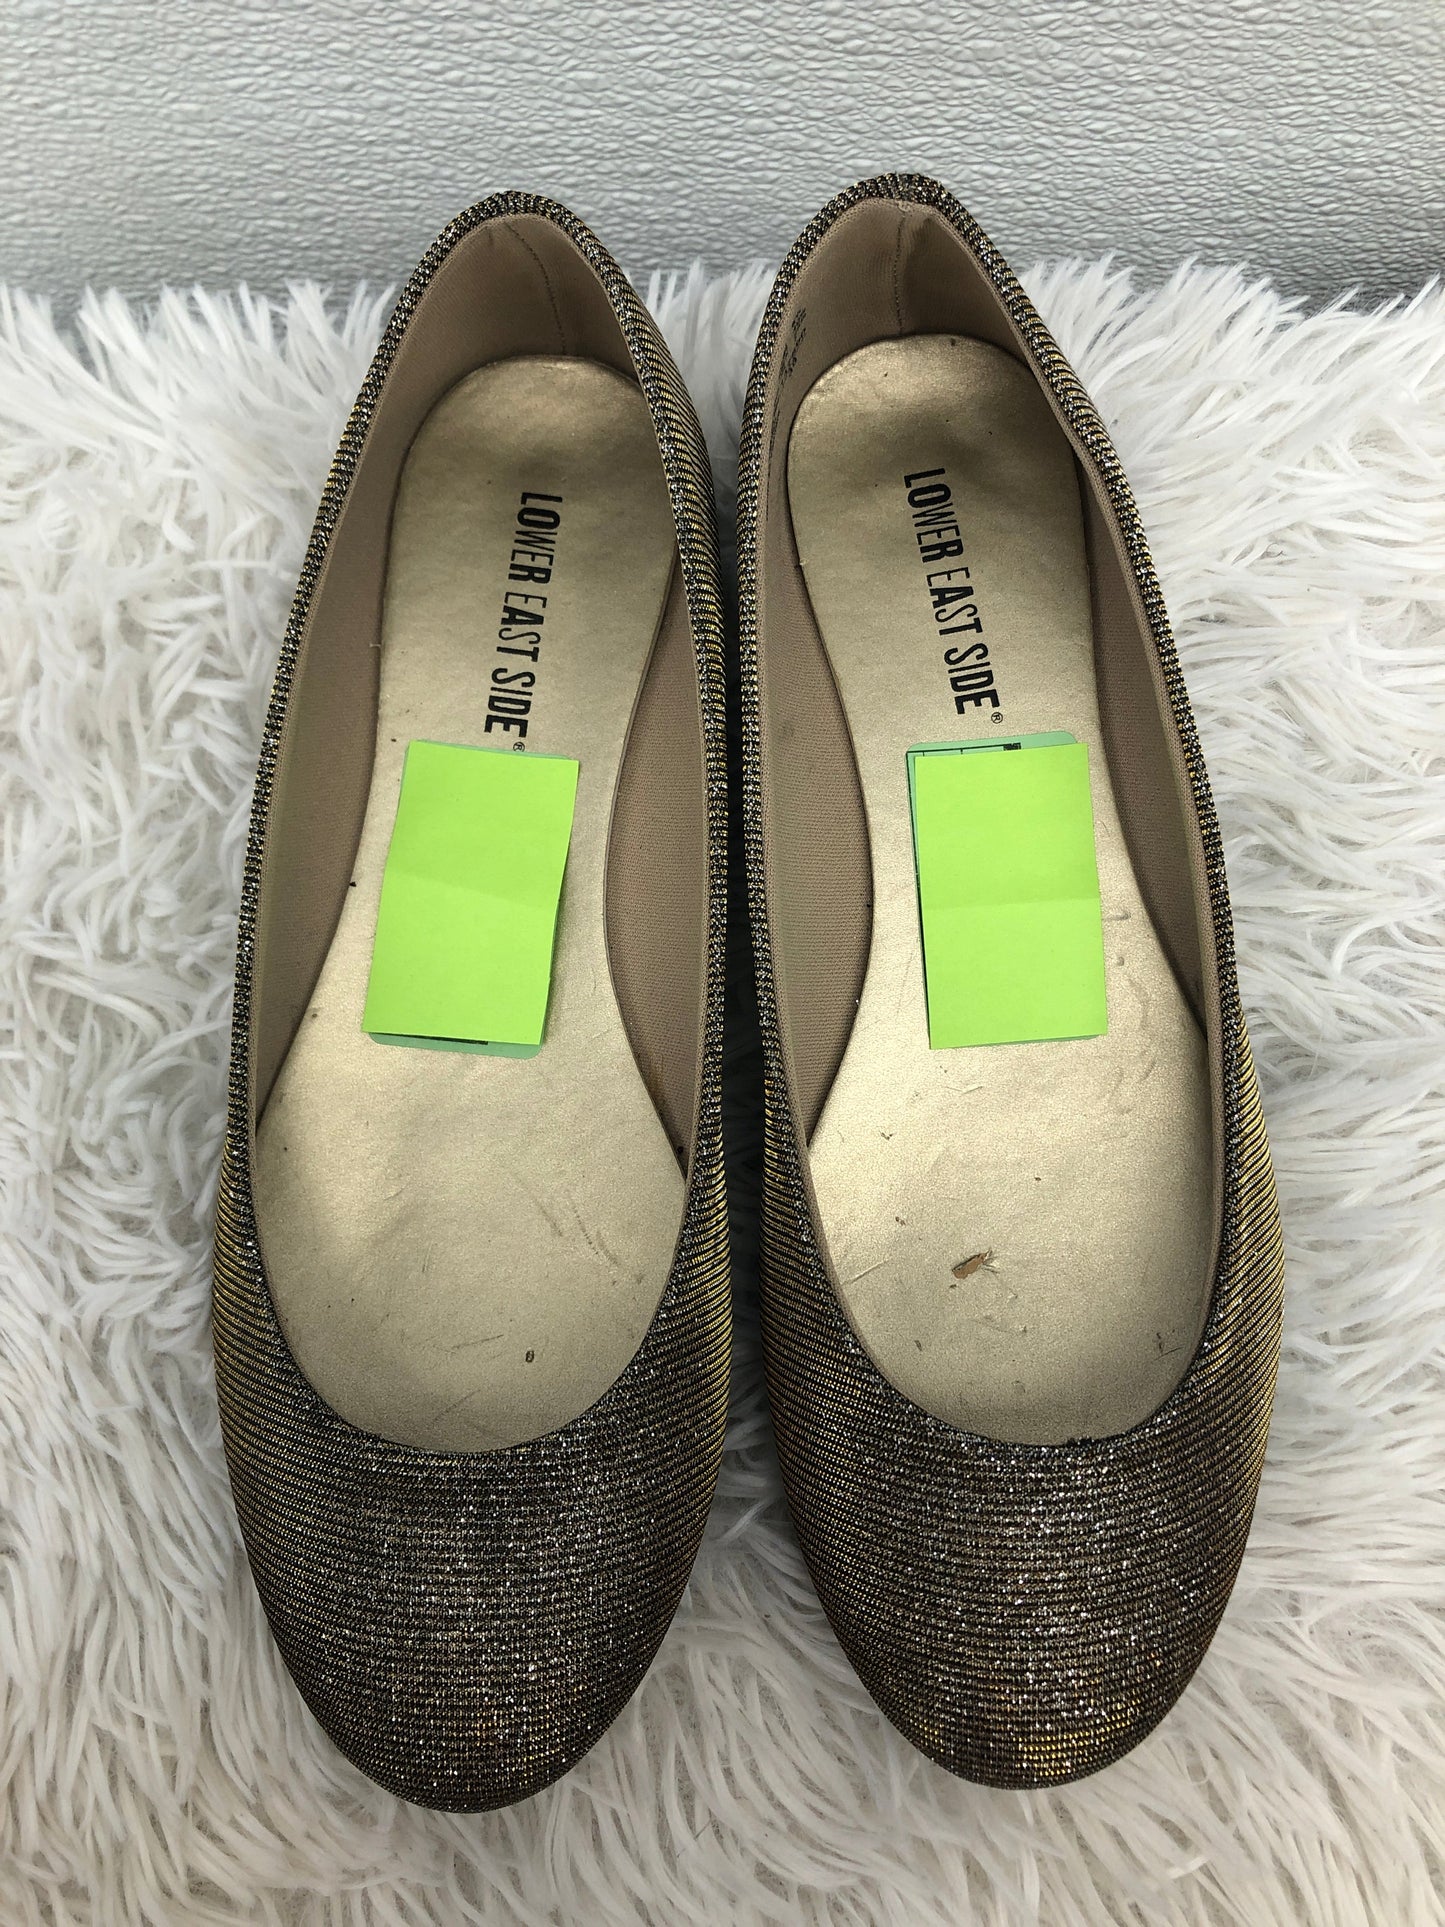 Shoes Flats Ballet By Lower Eastside  Size: 8.5